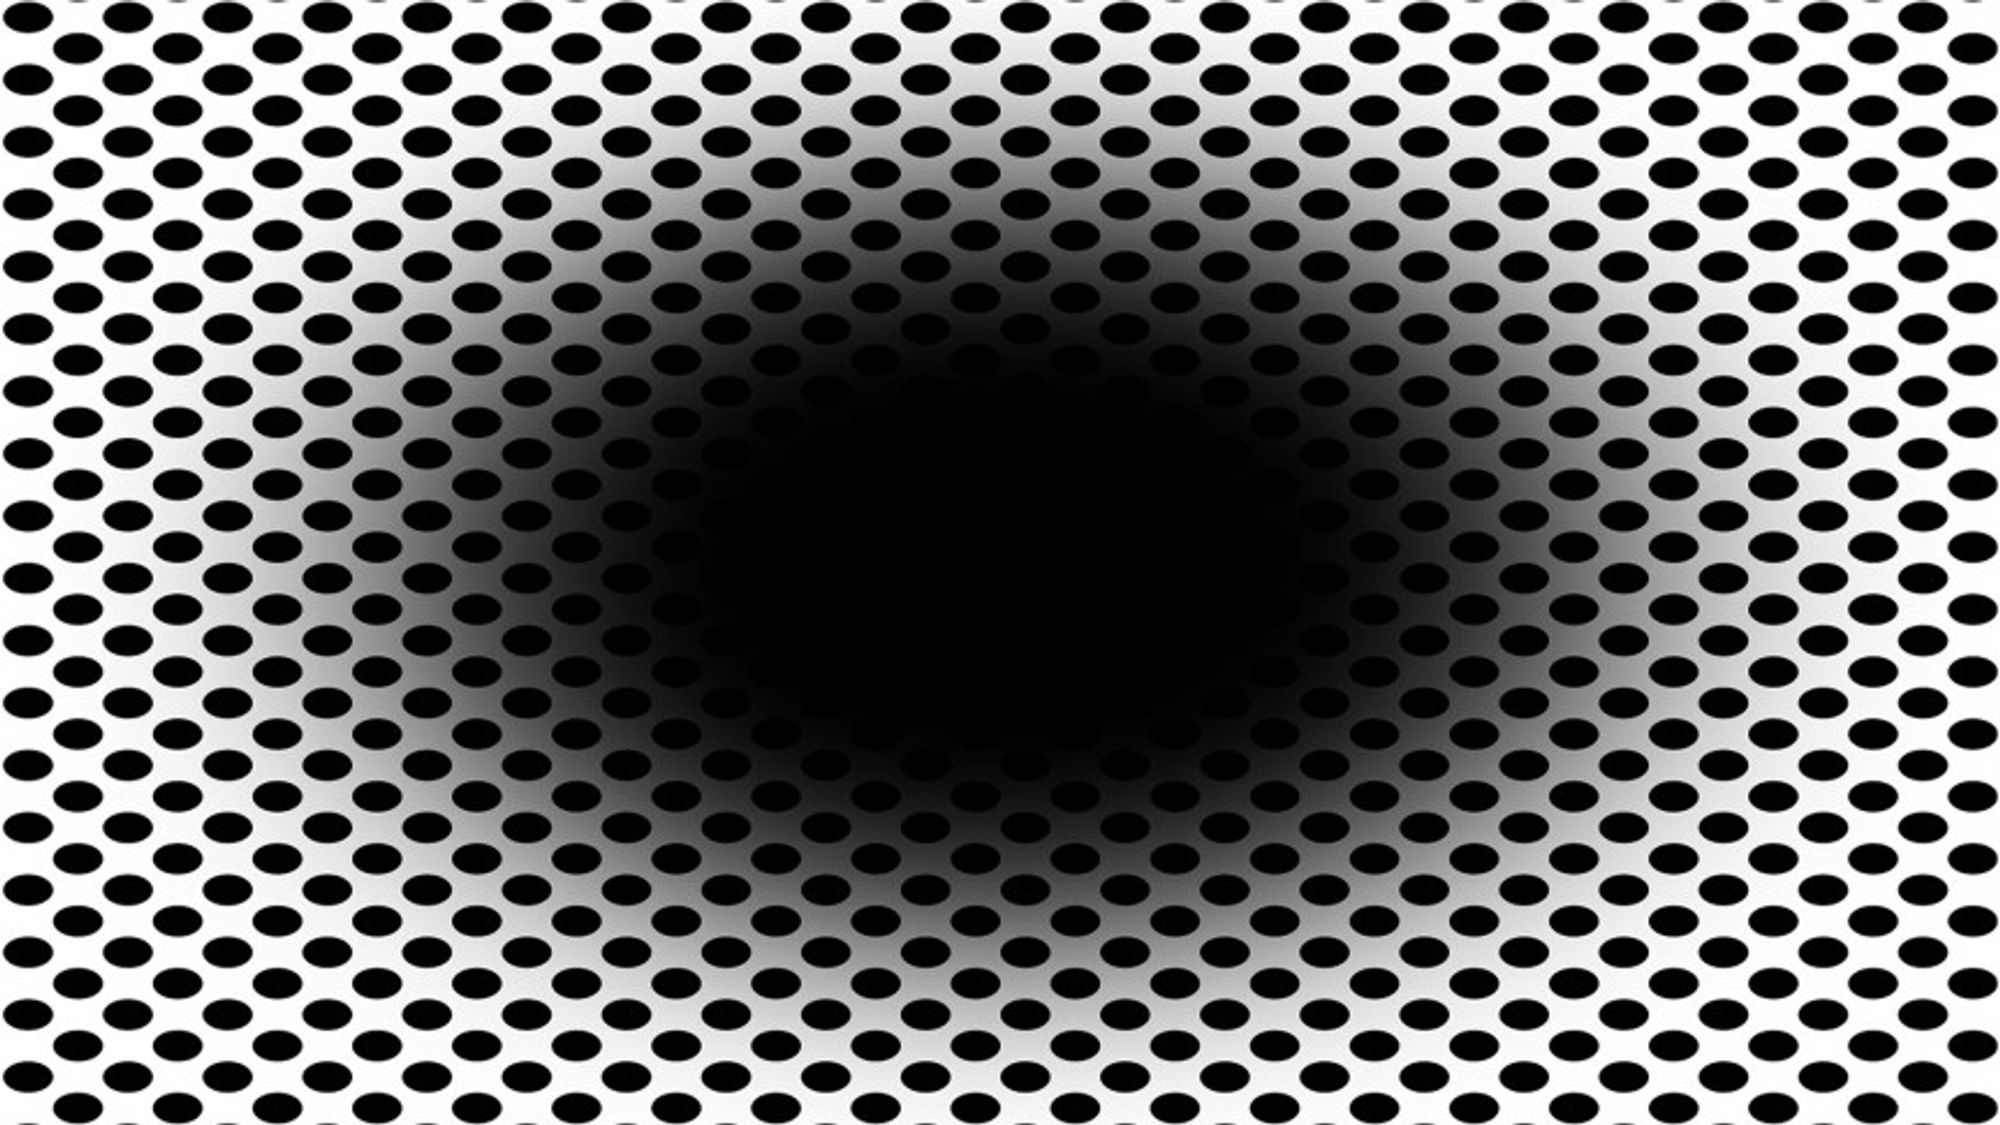 Scientists create an optical illusion that feels like an expanding black hole